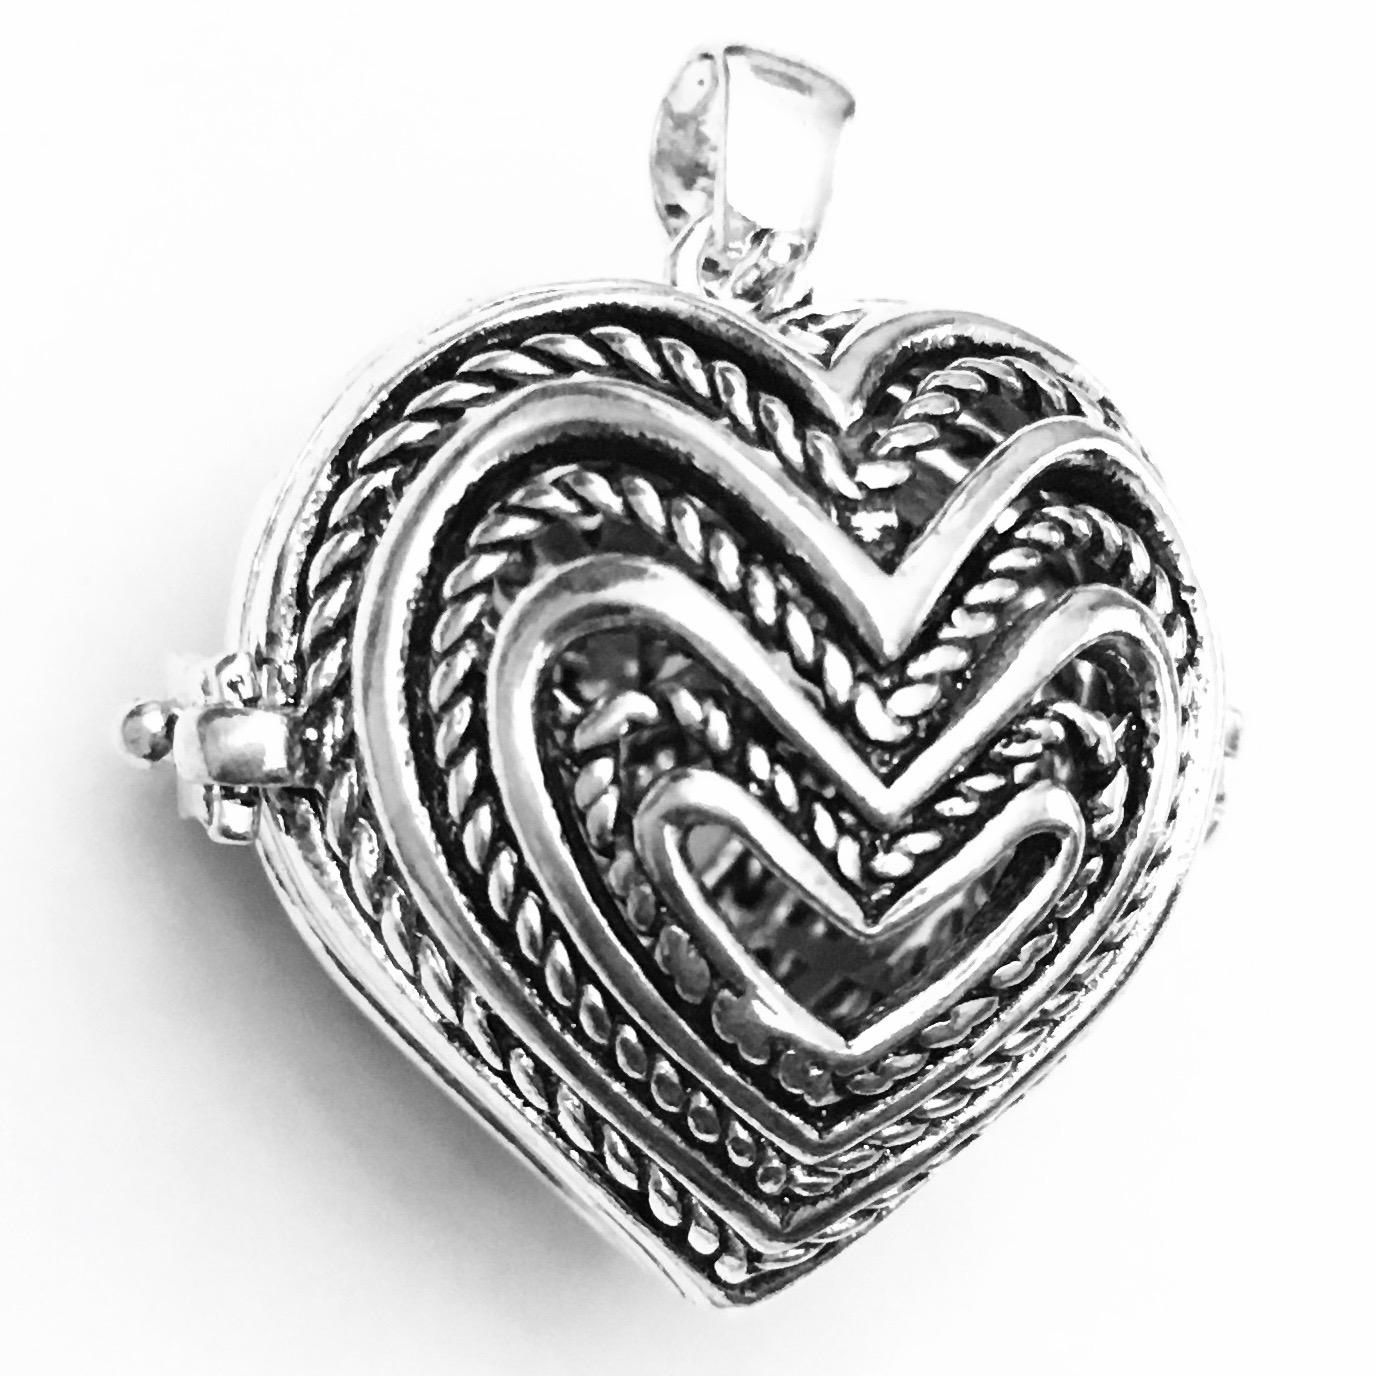 Turkish Sterling Silver Perfume Holder Locket 25 mm ID # 6915 - Click Image to Close